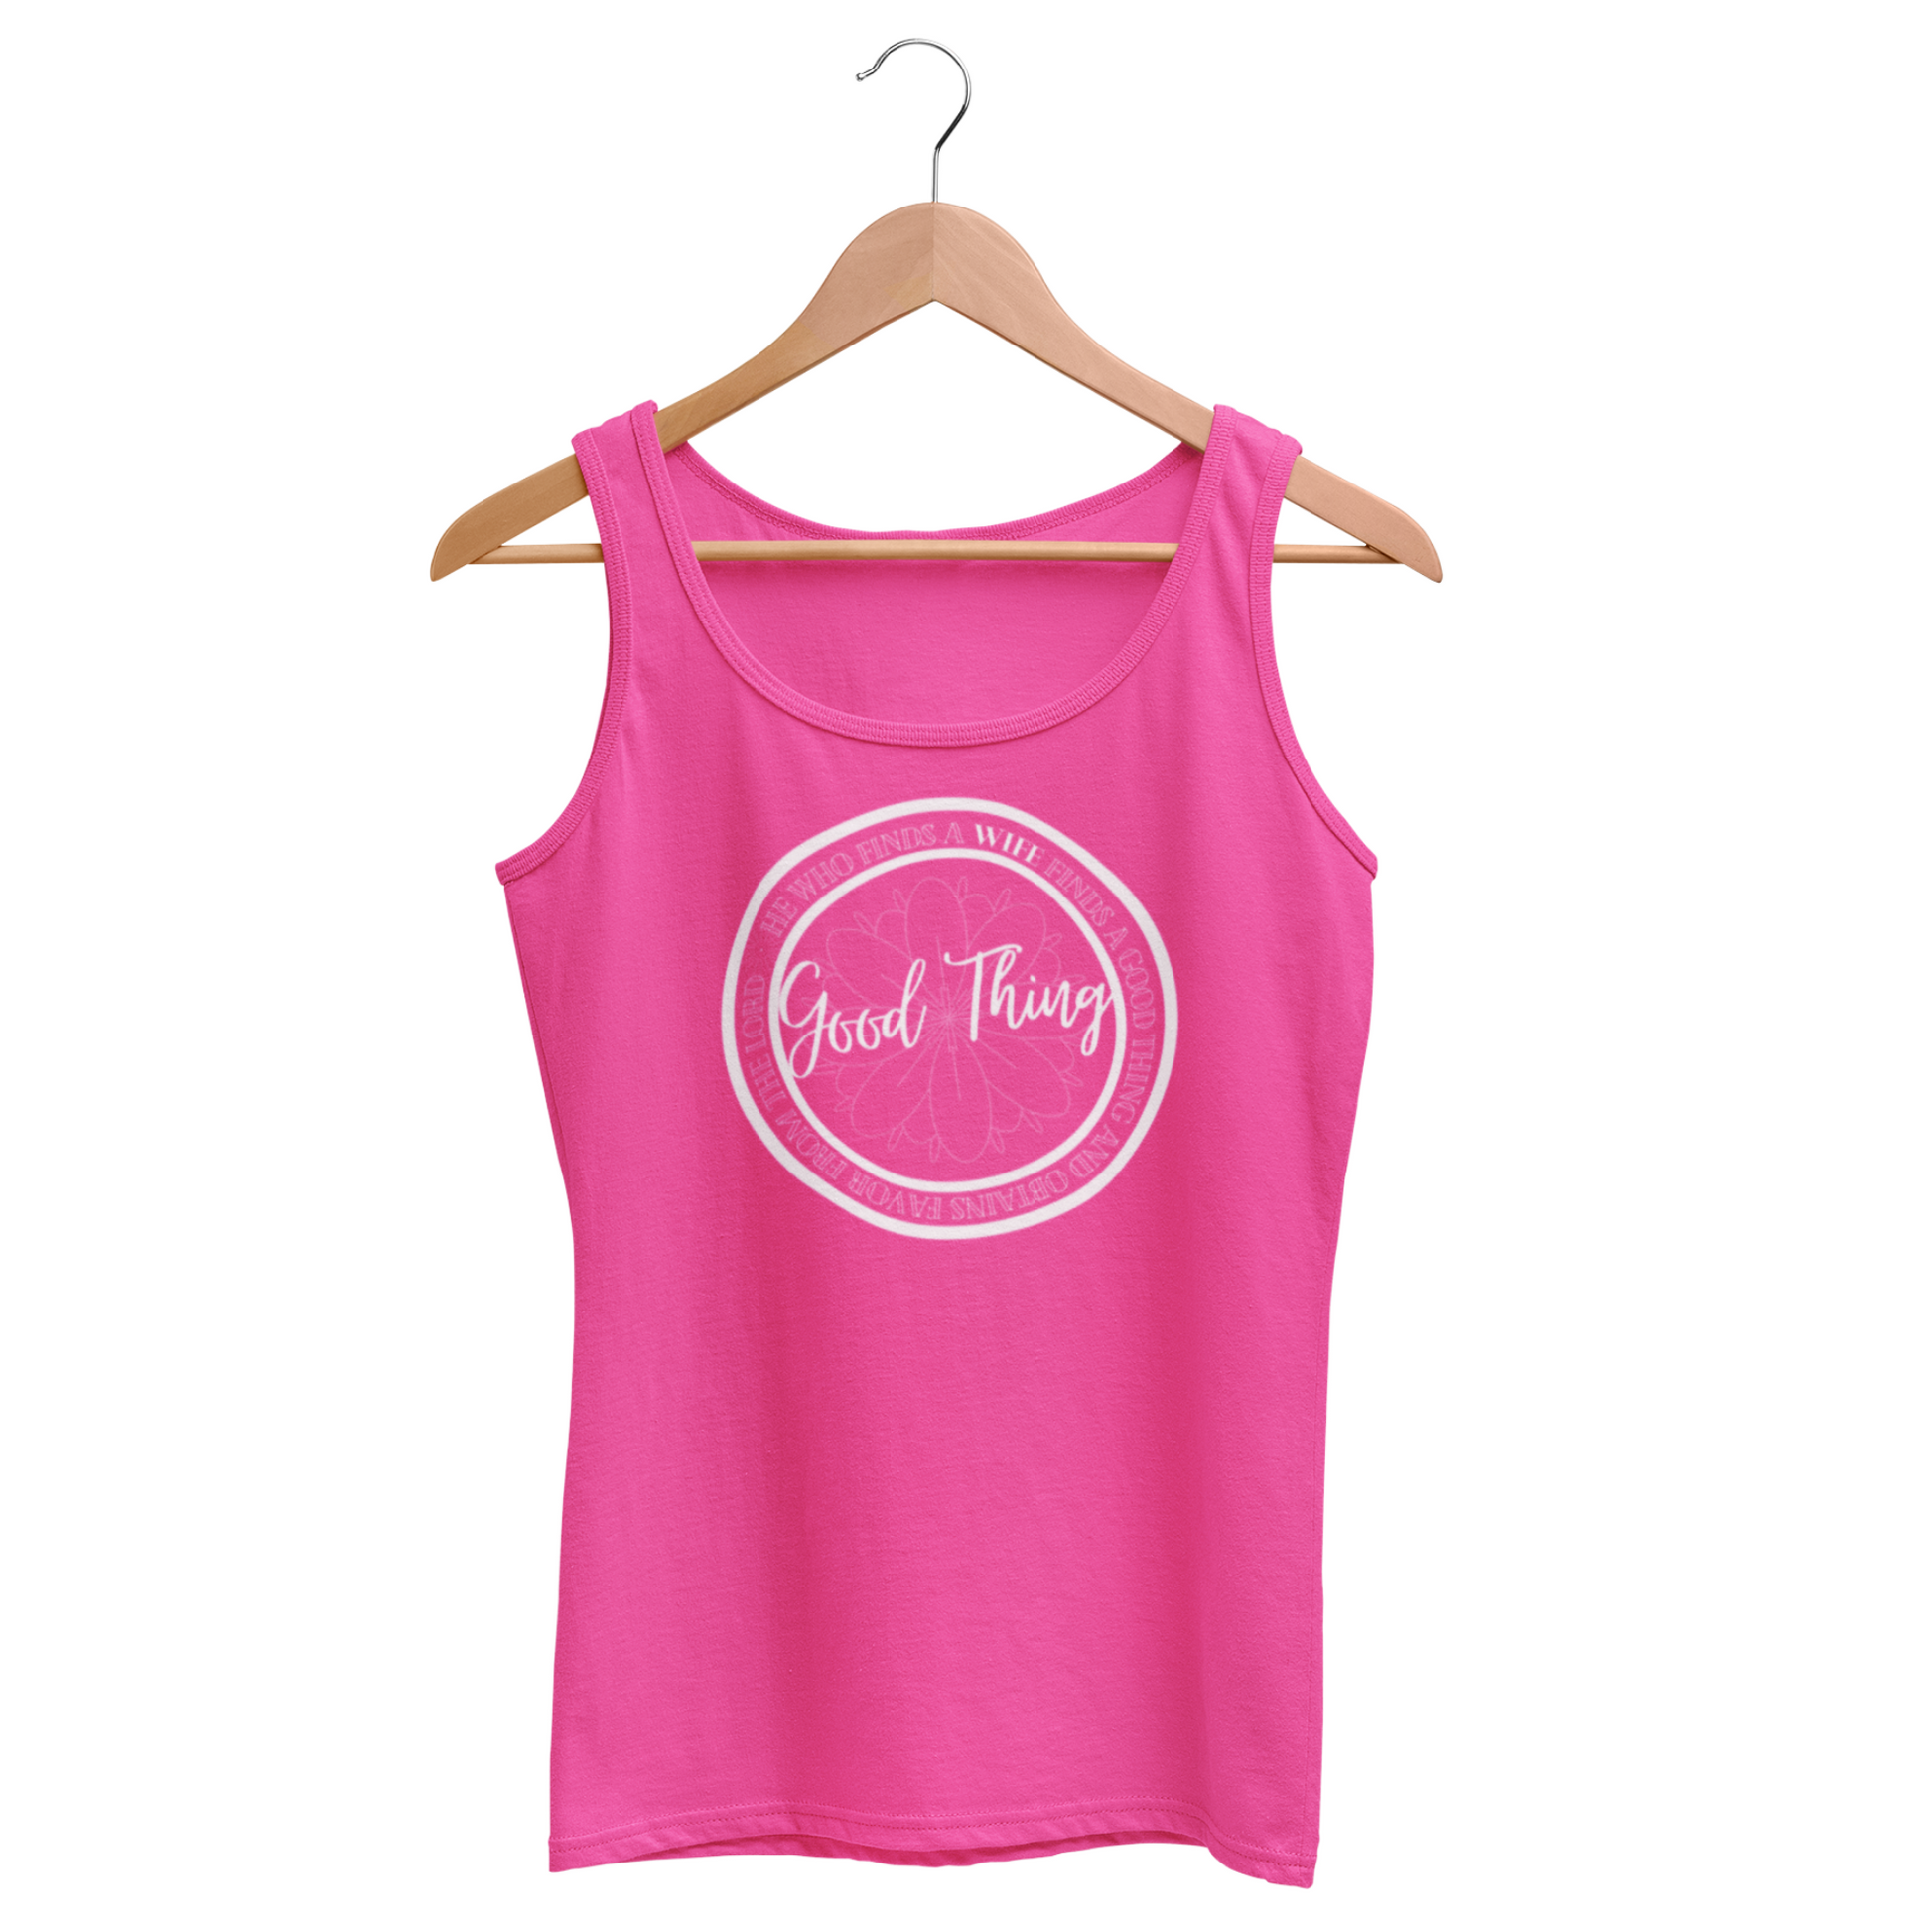 Good Thing Women's Christian Statement Pink Tank T-shirt. Perfect for saved women who believe in the sanctity of marriage. Get yours today and gift one to a friend. Soft comfortable fabric great to wear for a workout or just out and about. Trendy tank t-shirt.